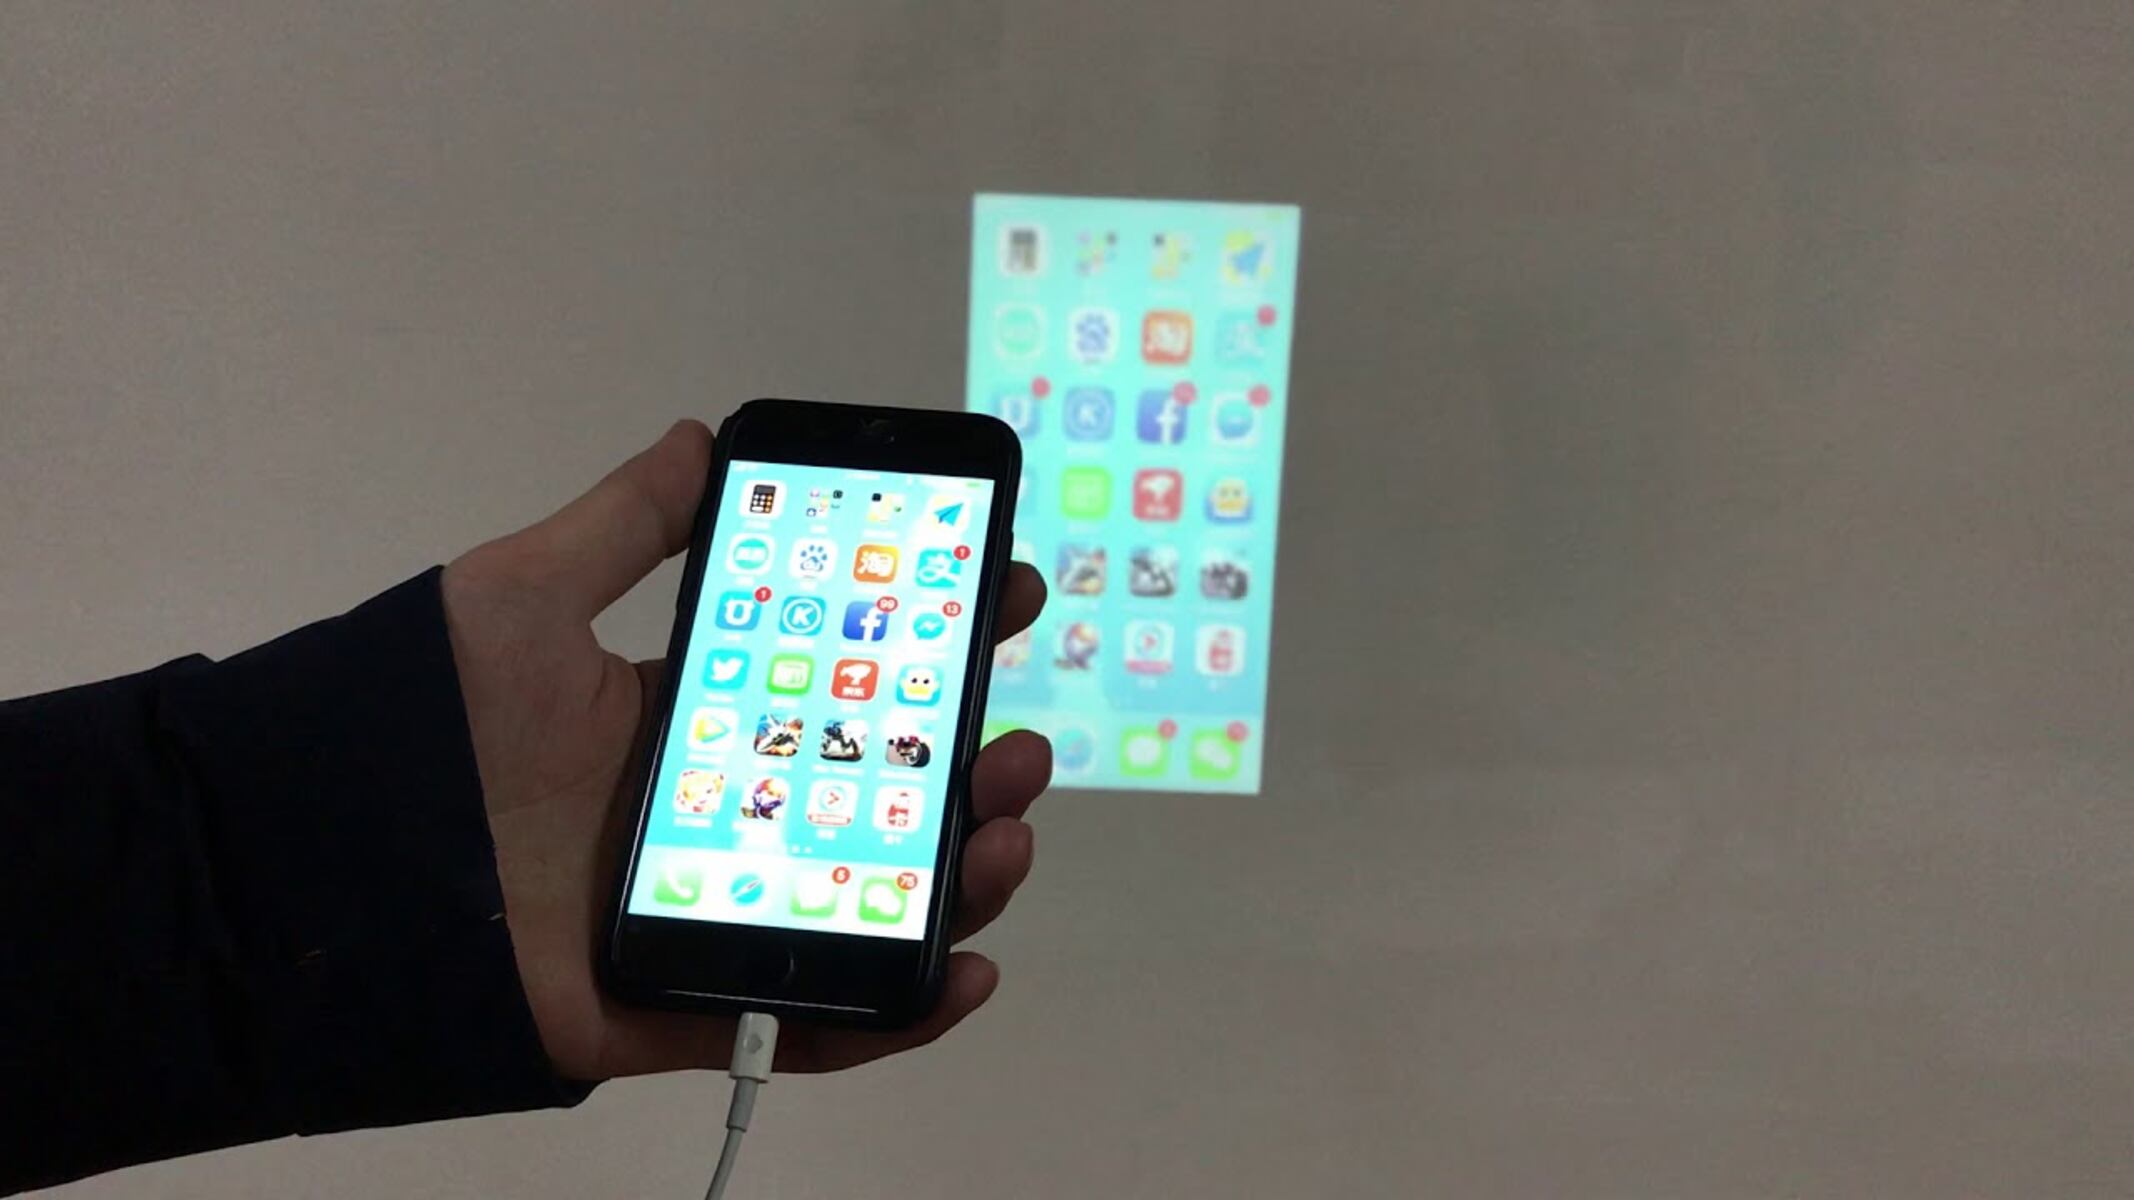 how-to-screen-mirror-iphone-to-projector